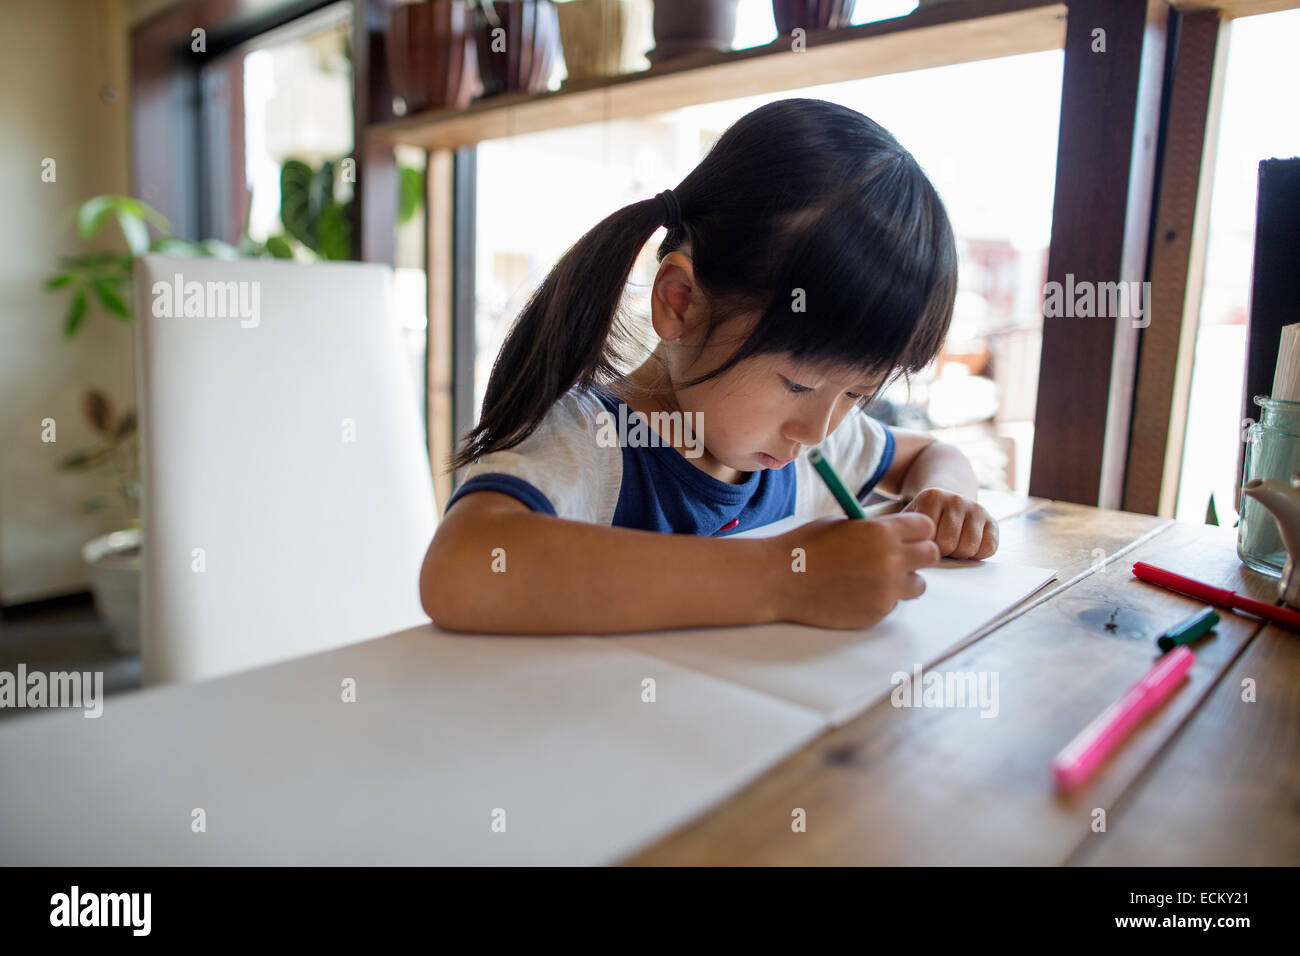 Girl with pigtails sitting at a table, drawing with felt tip pens. Stock Photo